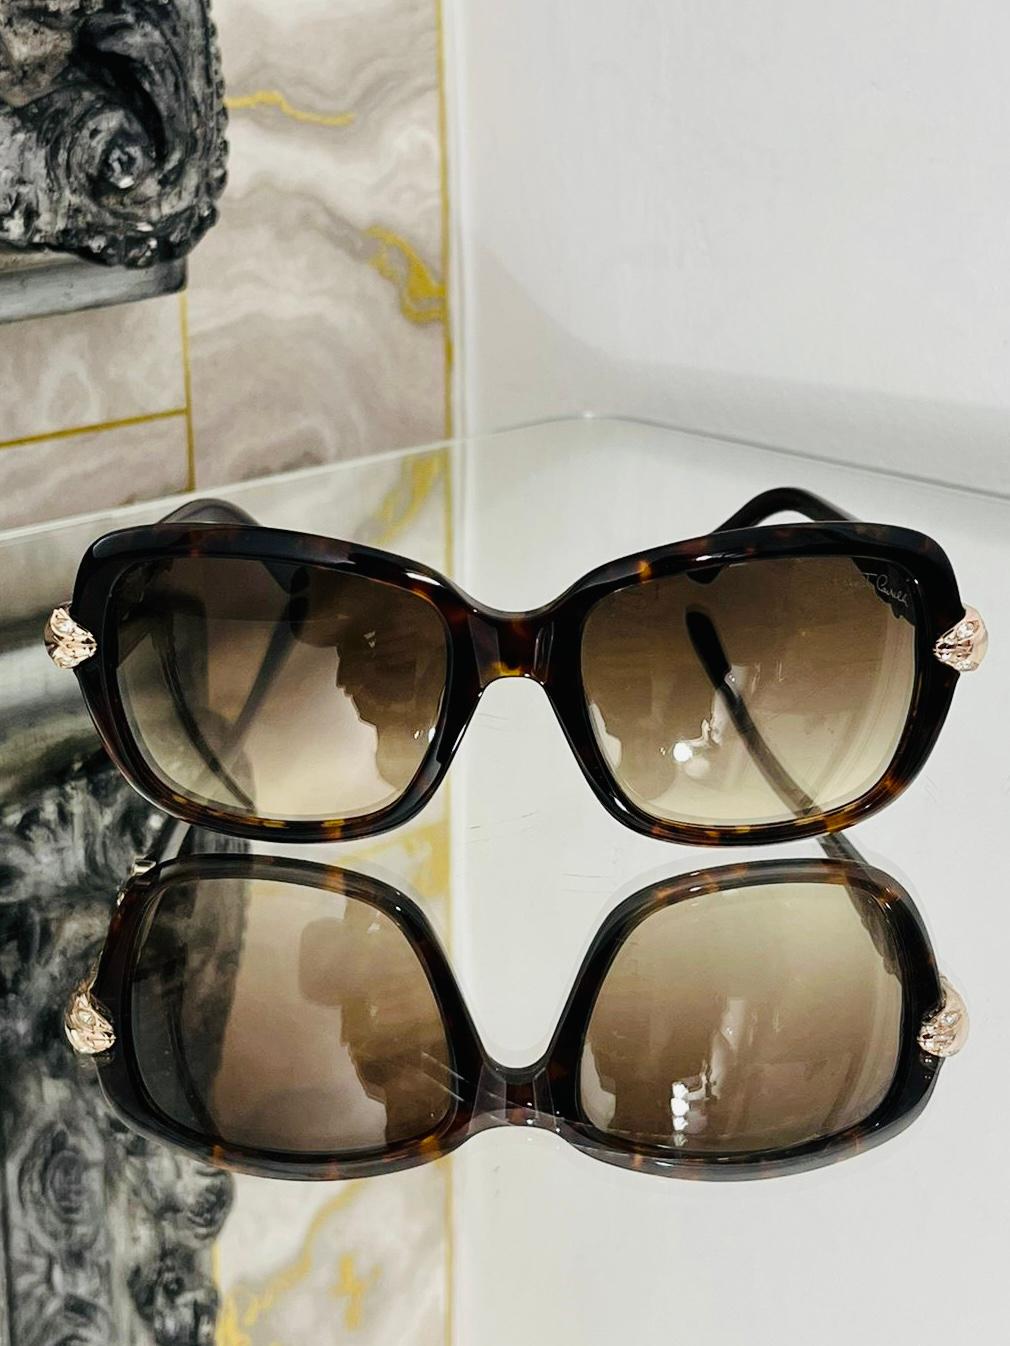 Roberto Cavalli Tortoise Shell Snake Embellished Sunglasses

Brown toned acetate sunglasses with gold metal 3D snakes to either side 

of the arms.

Size - One Size

Condition - Very Good

Composition - Plastic

Comes With - Case